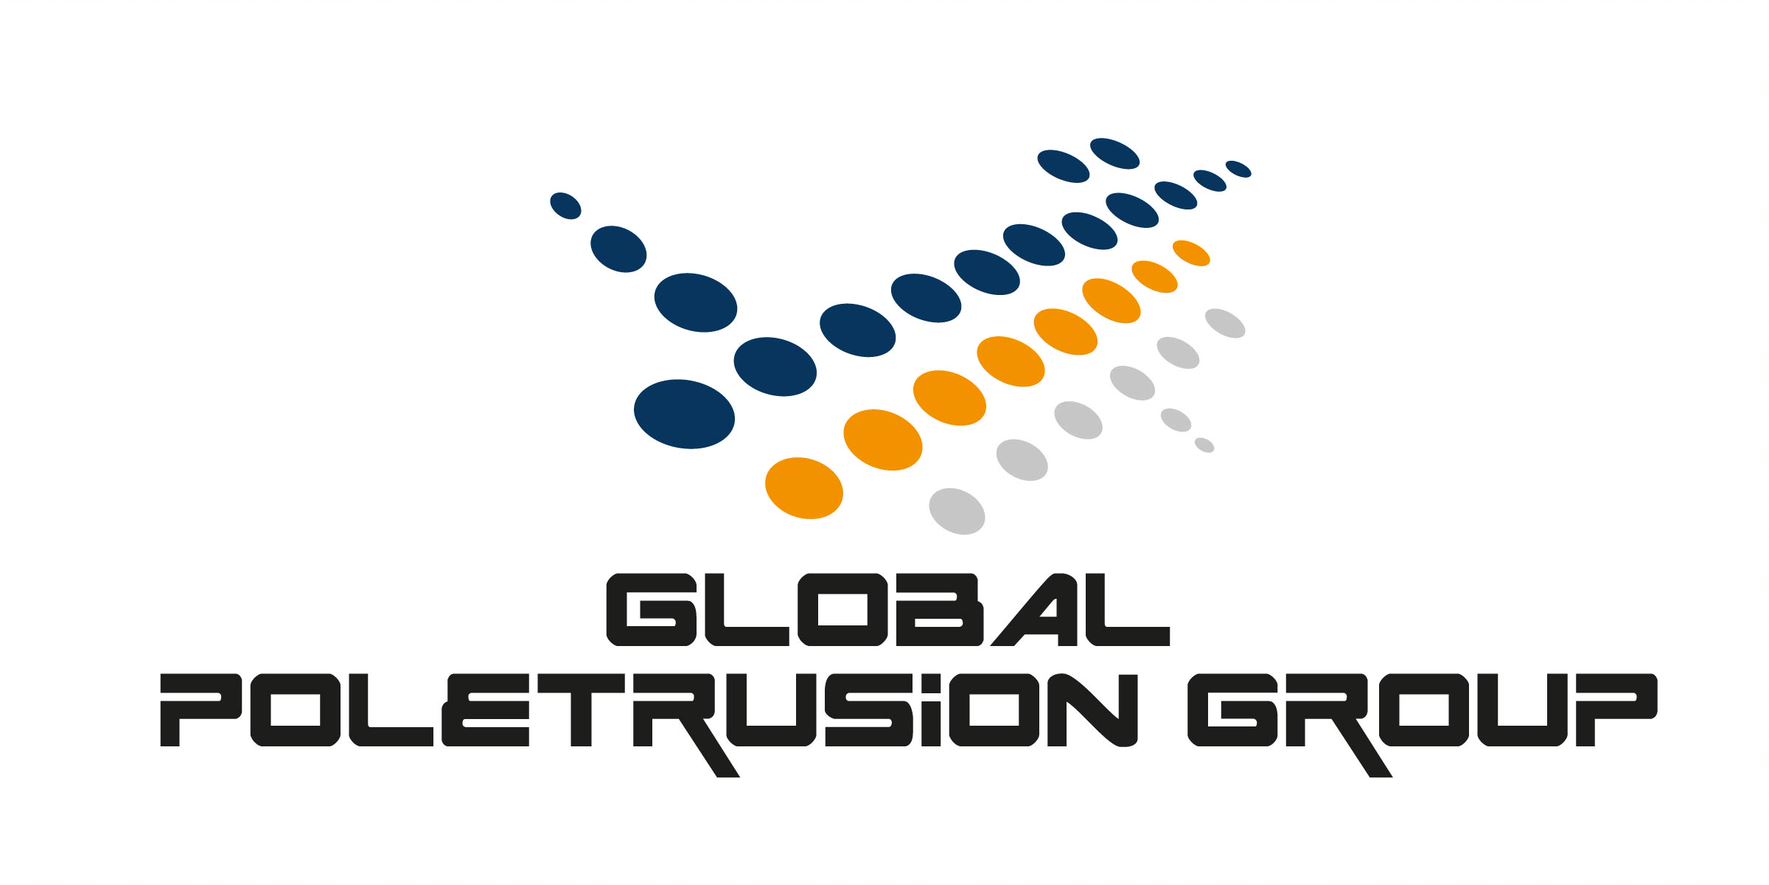 Global PoleTrusion Group Corp., Friday, January 11, 2019, Press release picture